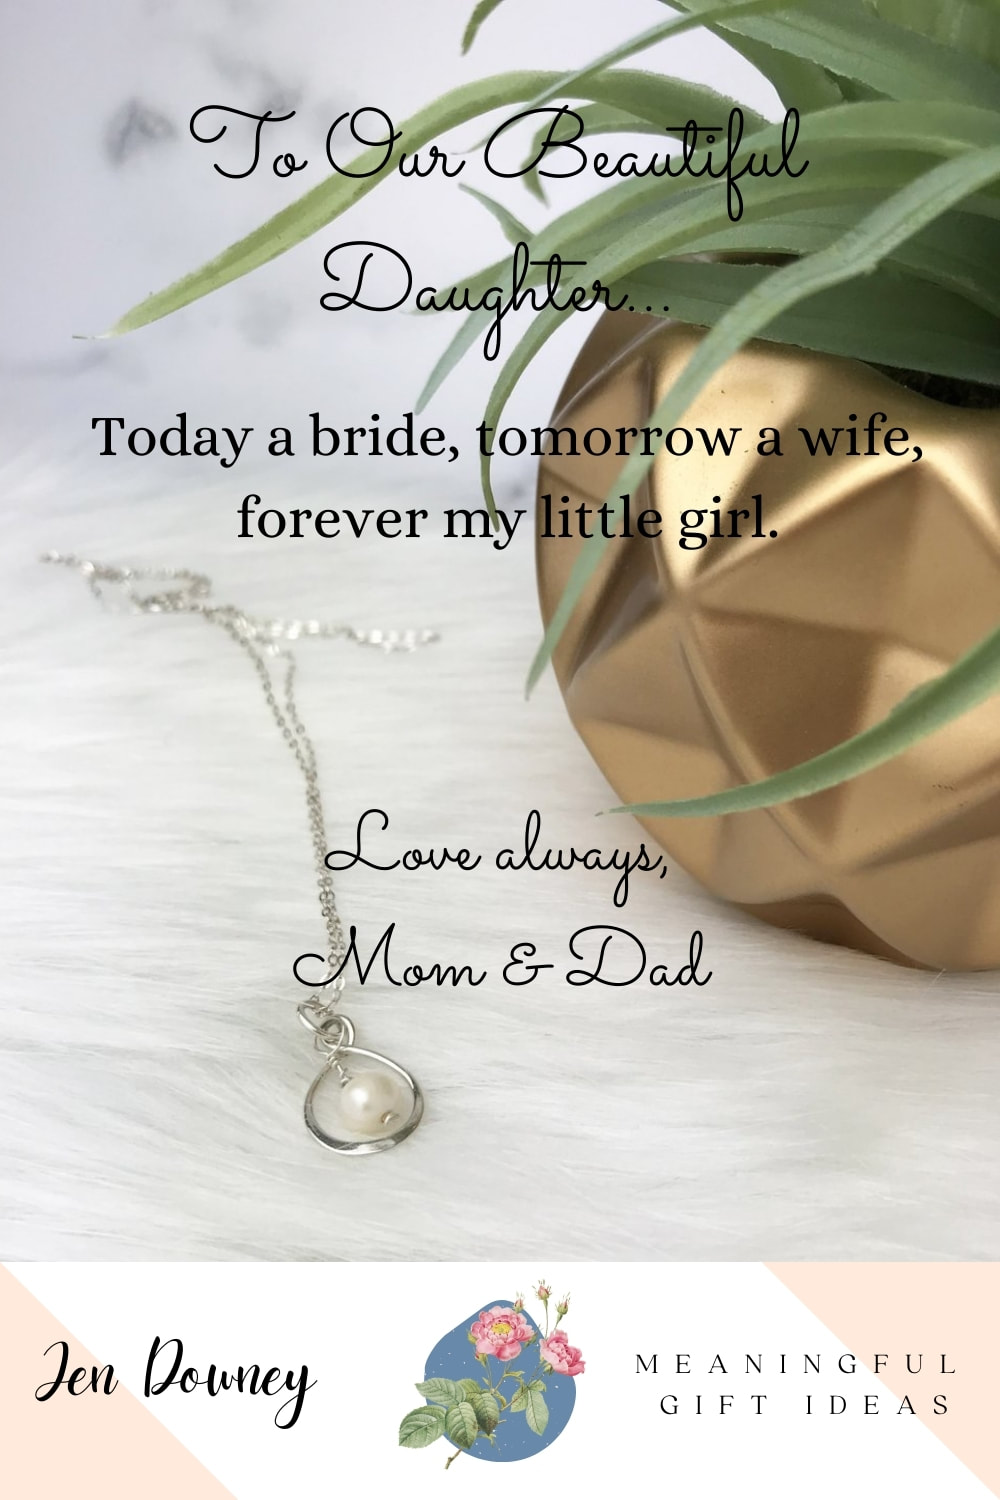 Today a bride, tomorrow a wife, forever my little girl wedding quote from mom